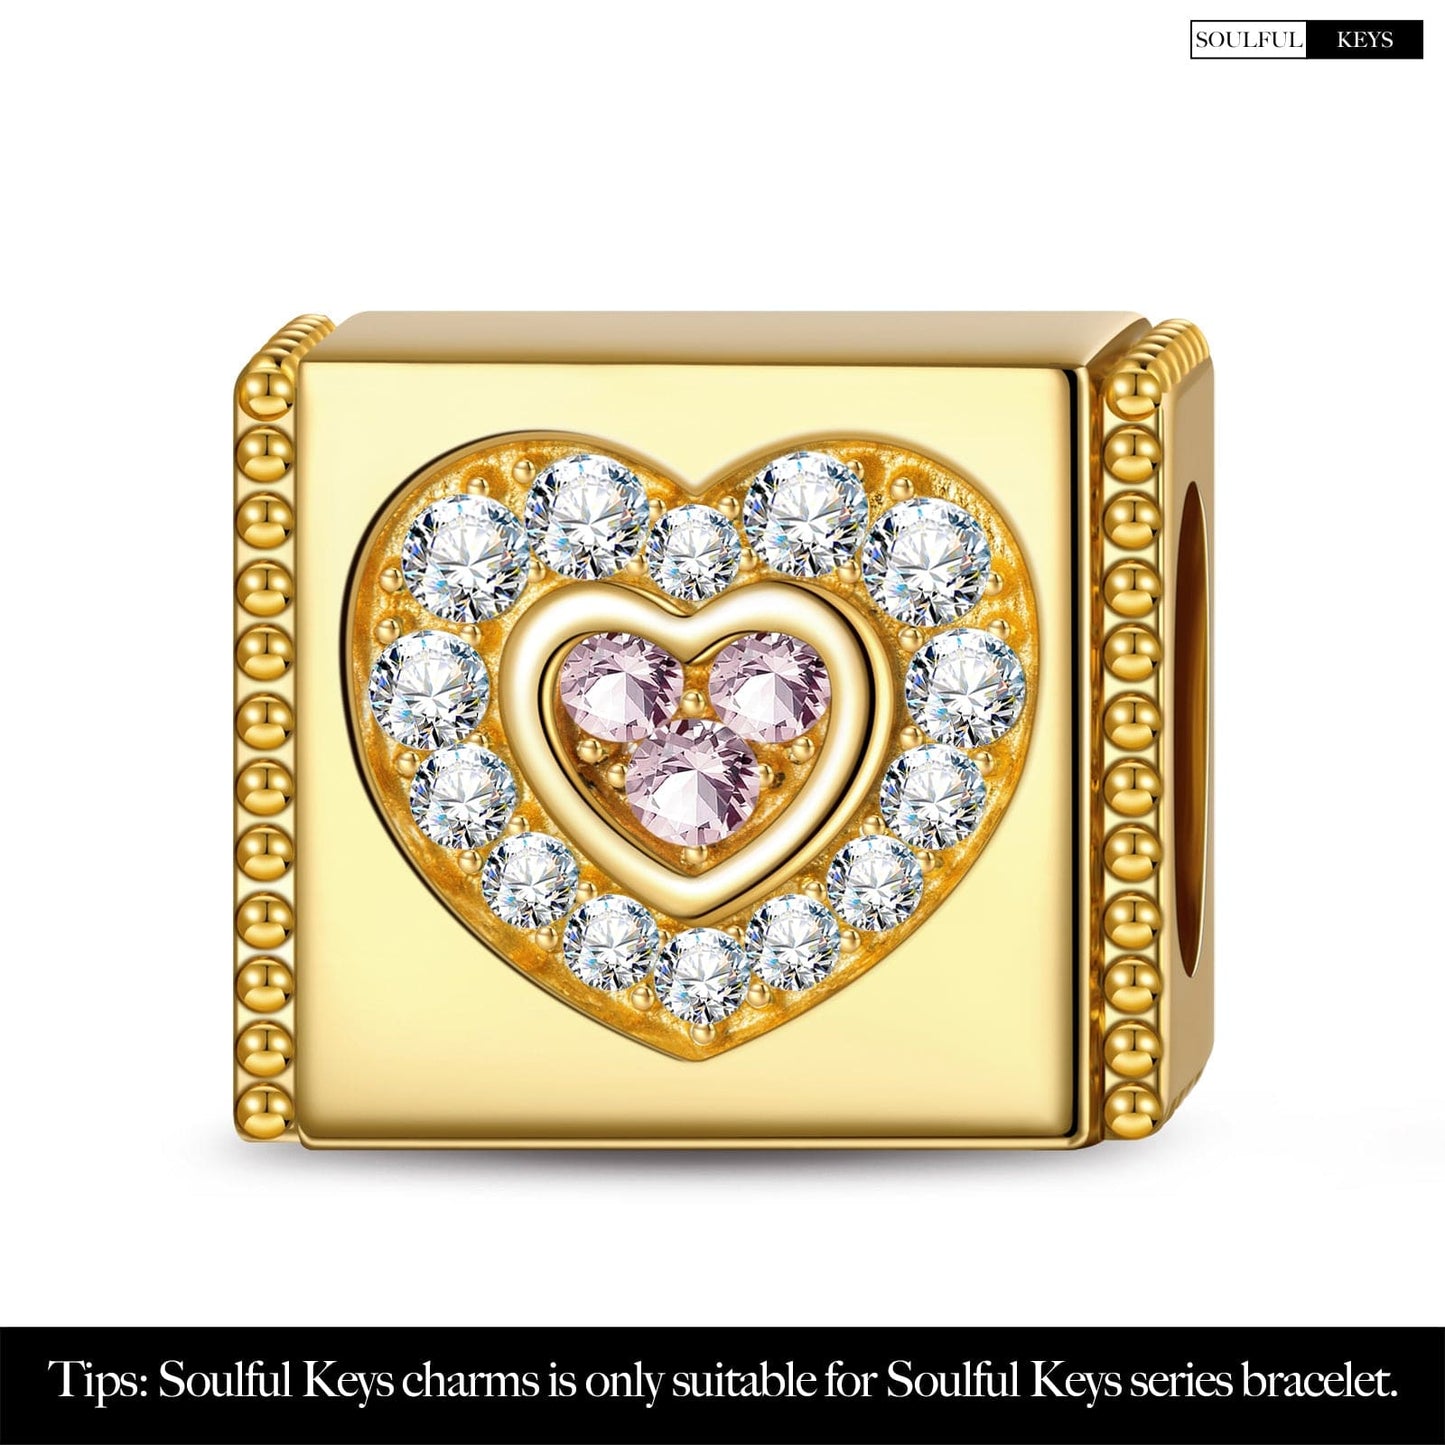 Heart In Heart Tarnish-resistant Silver Rectangular Charms In 14K Gold Plated